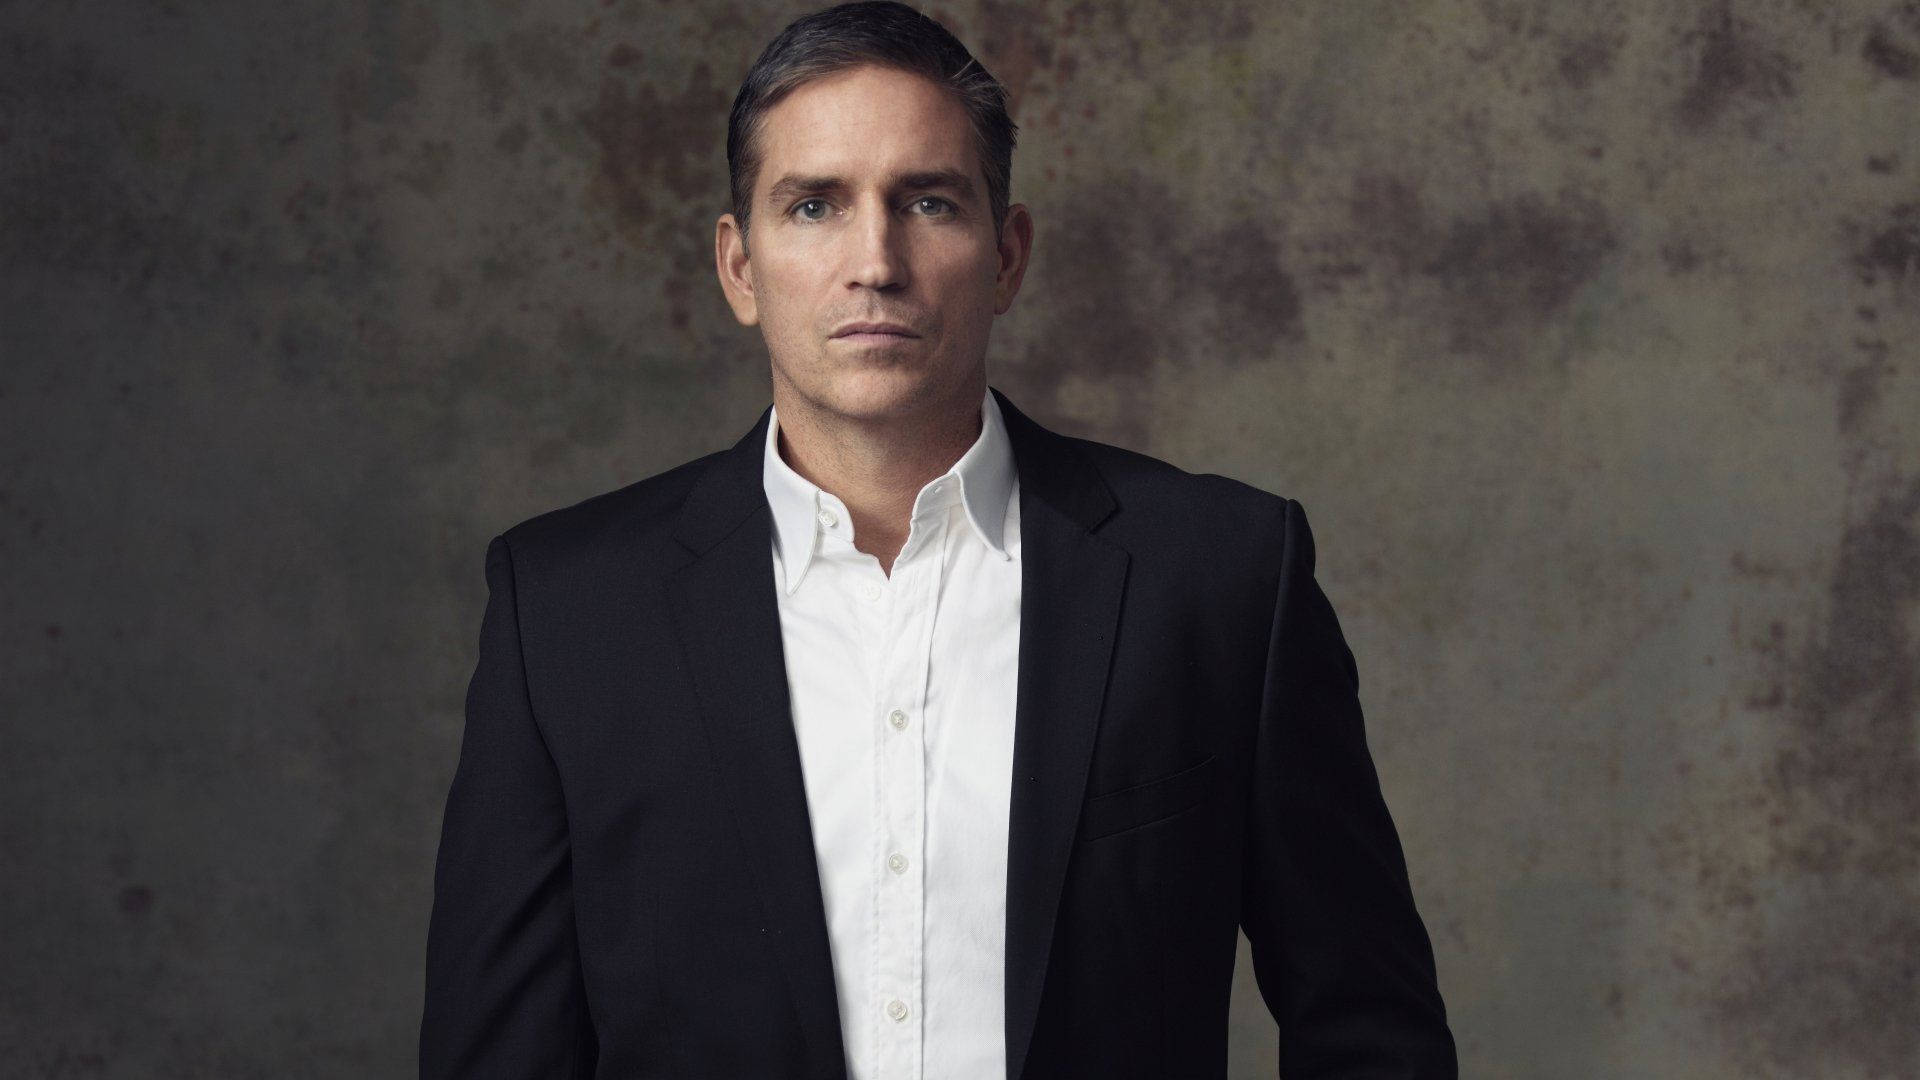 Jim Caviezel As A Special Forces Soldier Wallpaper